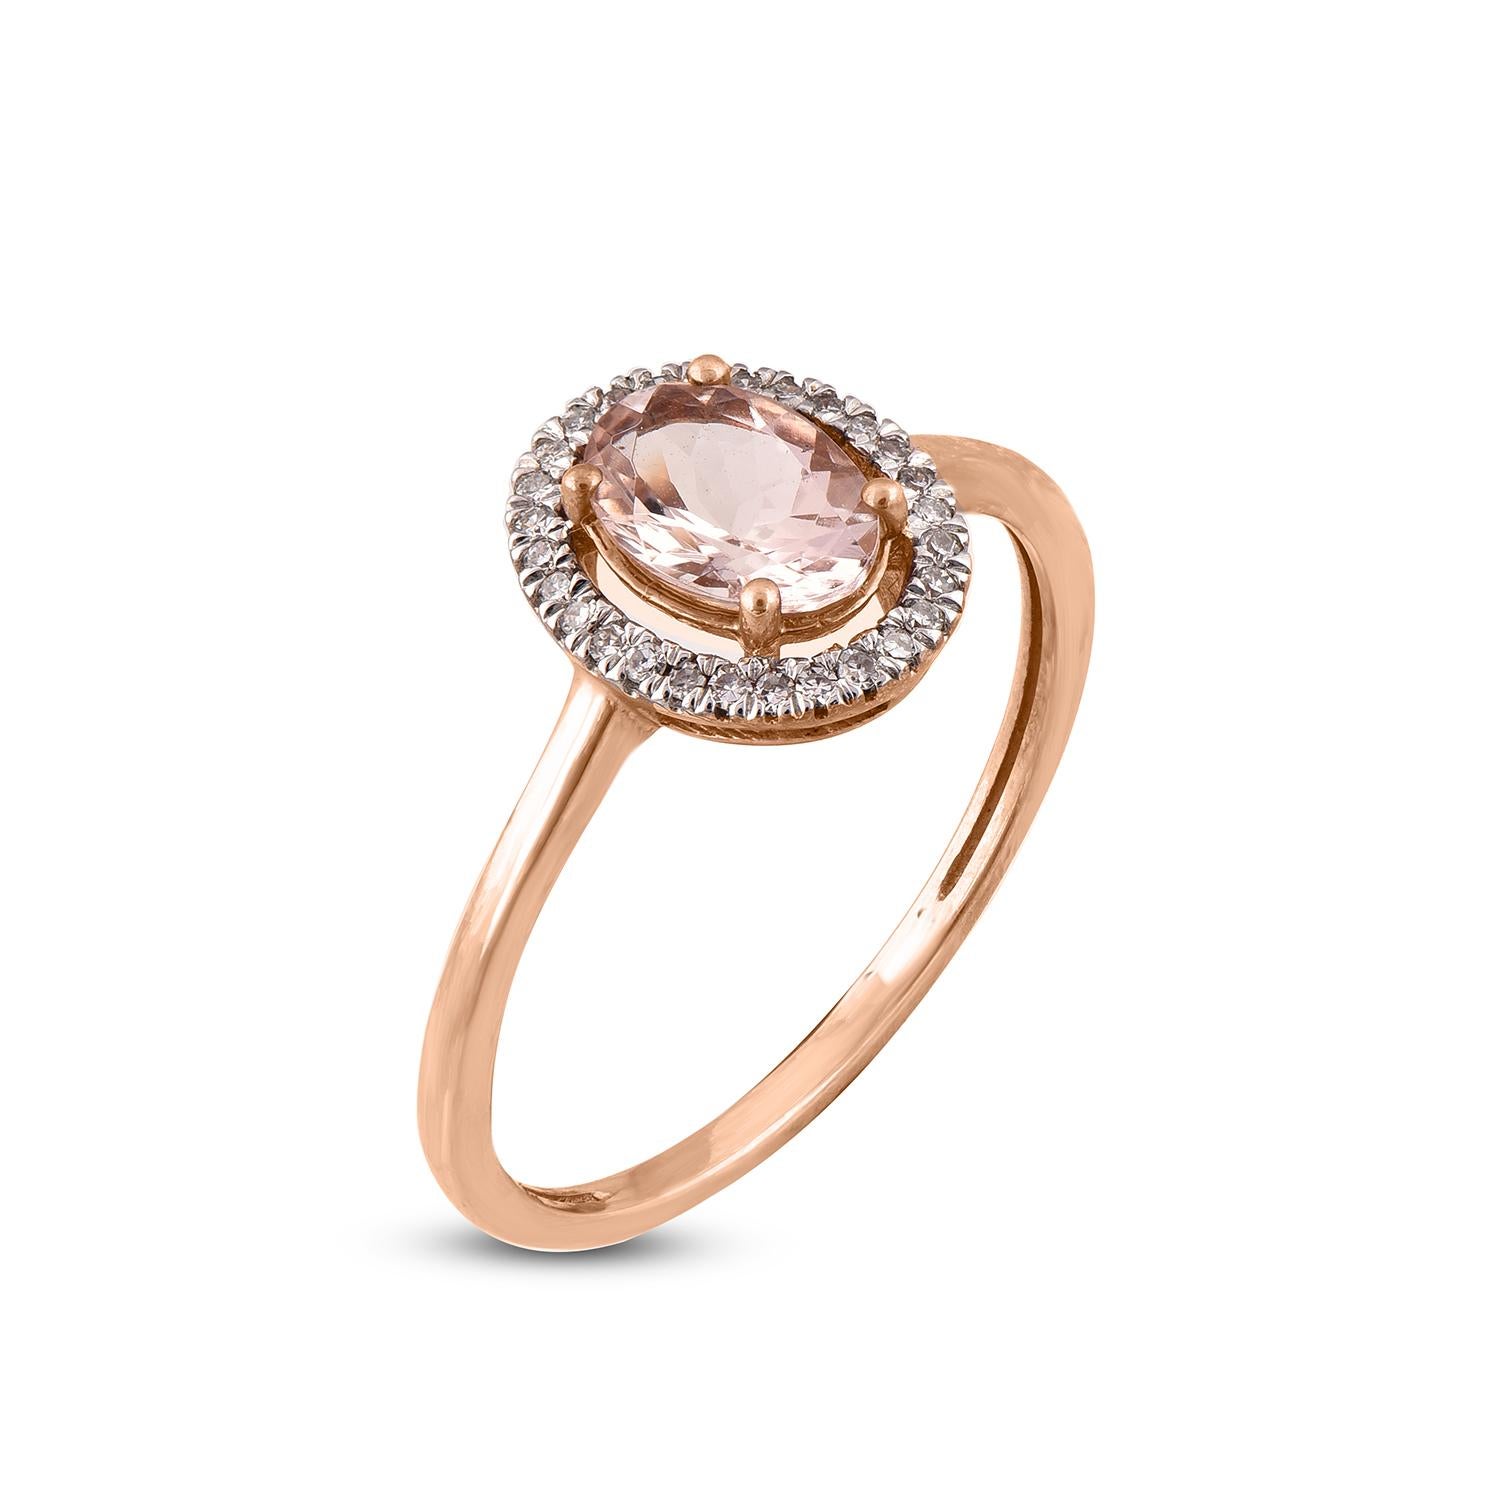 This ring looks truly elegant, studded with 28 brilliant-cut diamonds and 1 natural morganite set in prong setting and crafted in 14 karat rose gold. Diamonds are graded H-I Color, I2 Clarity.
